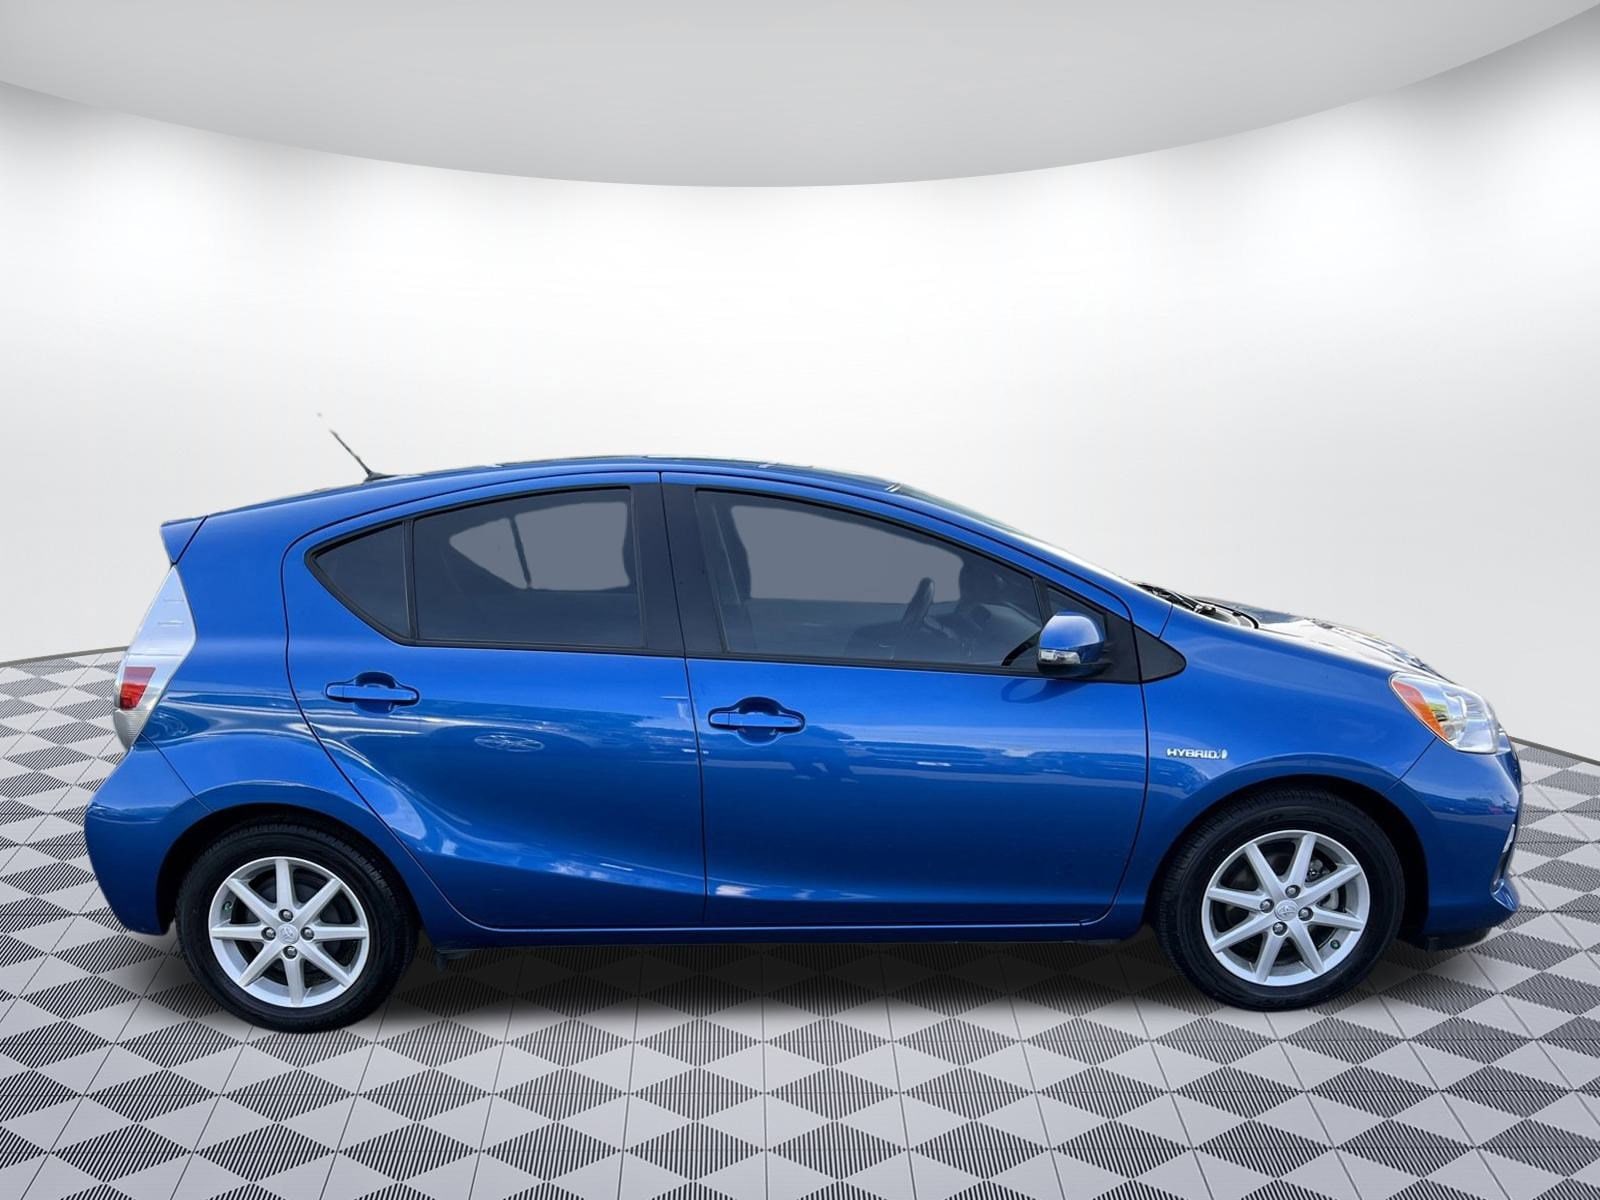 Used 2014 Toyota Prius c Four with VIN JTDKDTB35E1064980 for sale in Bellingham, WA